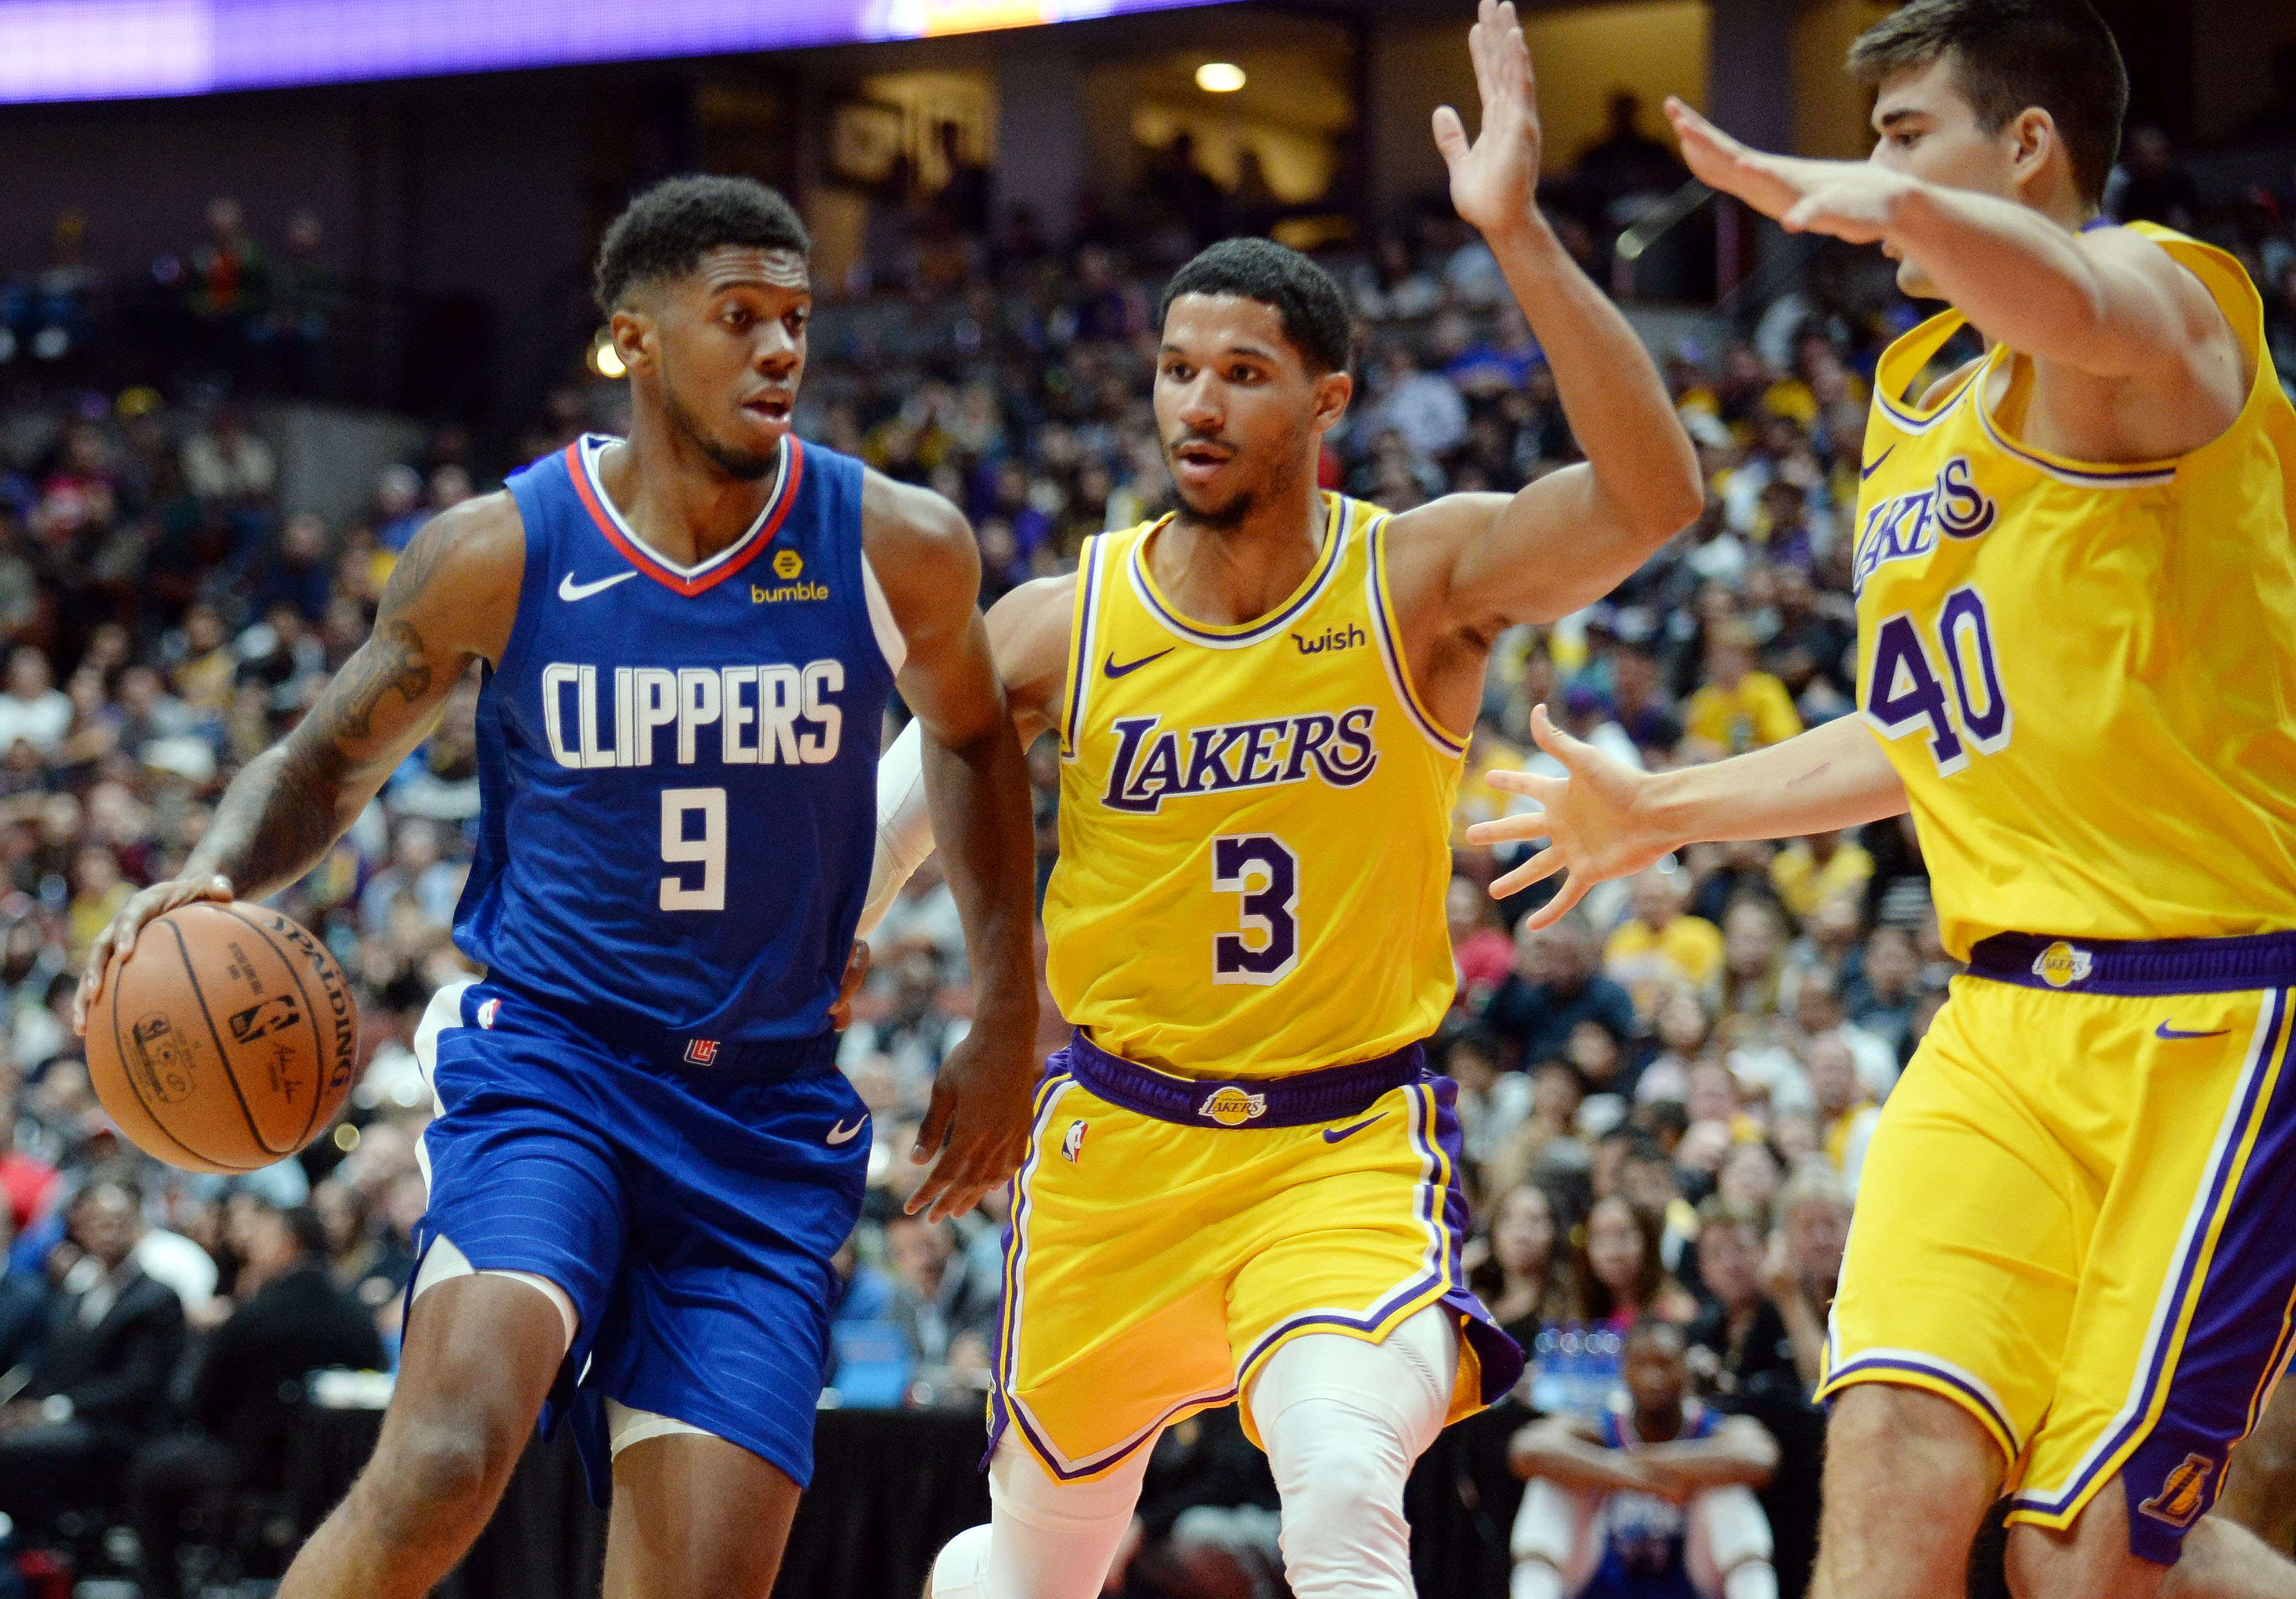 Winner Prediction Lakers vs Clippers